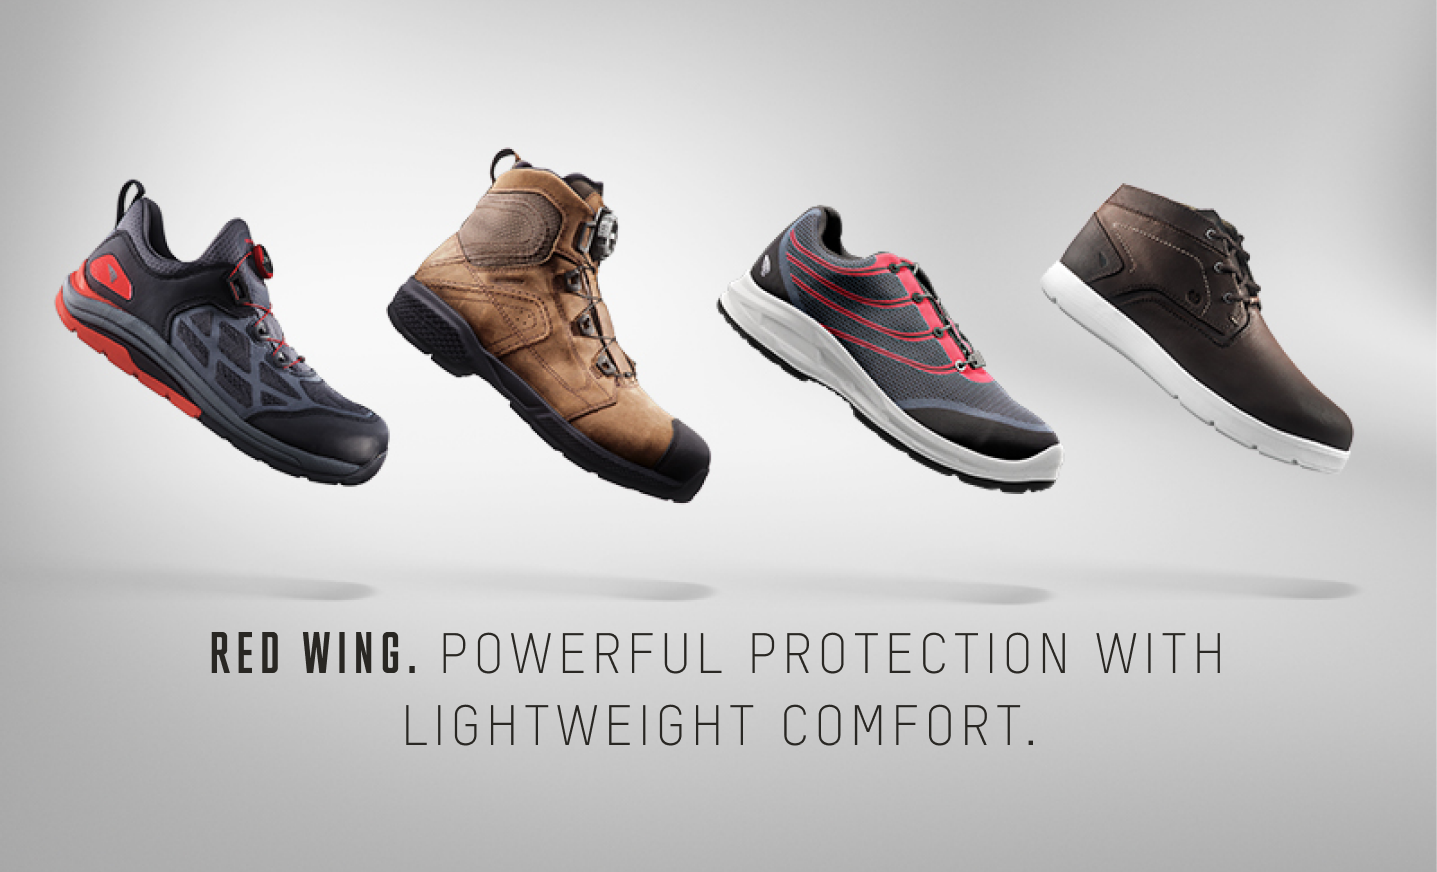 Red wing. Powerful Protection with lightweight comfort.